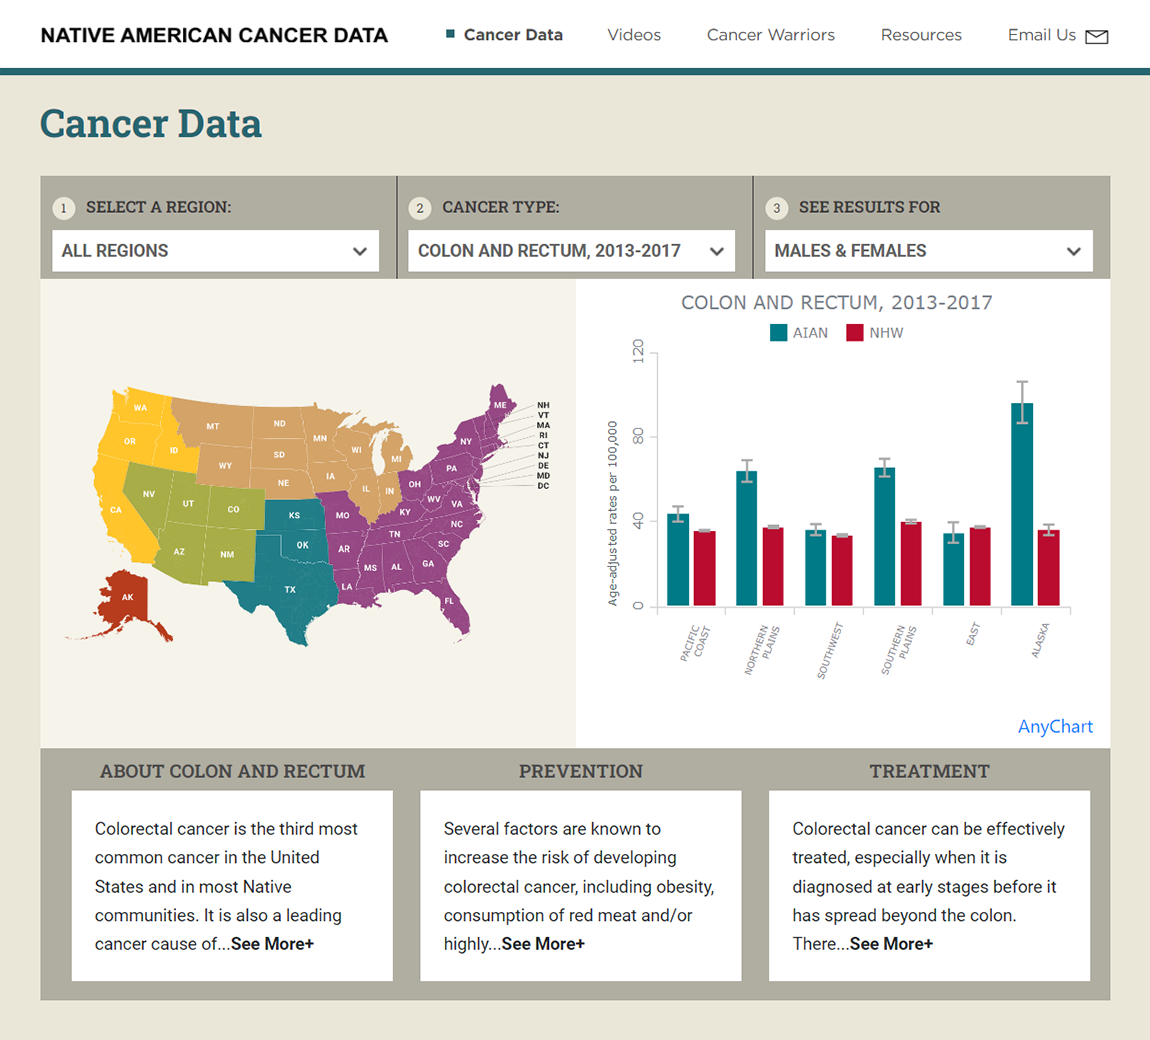 AIAN cancer data visualization charts